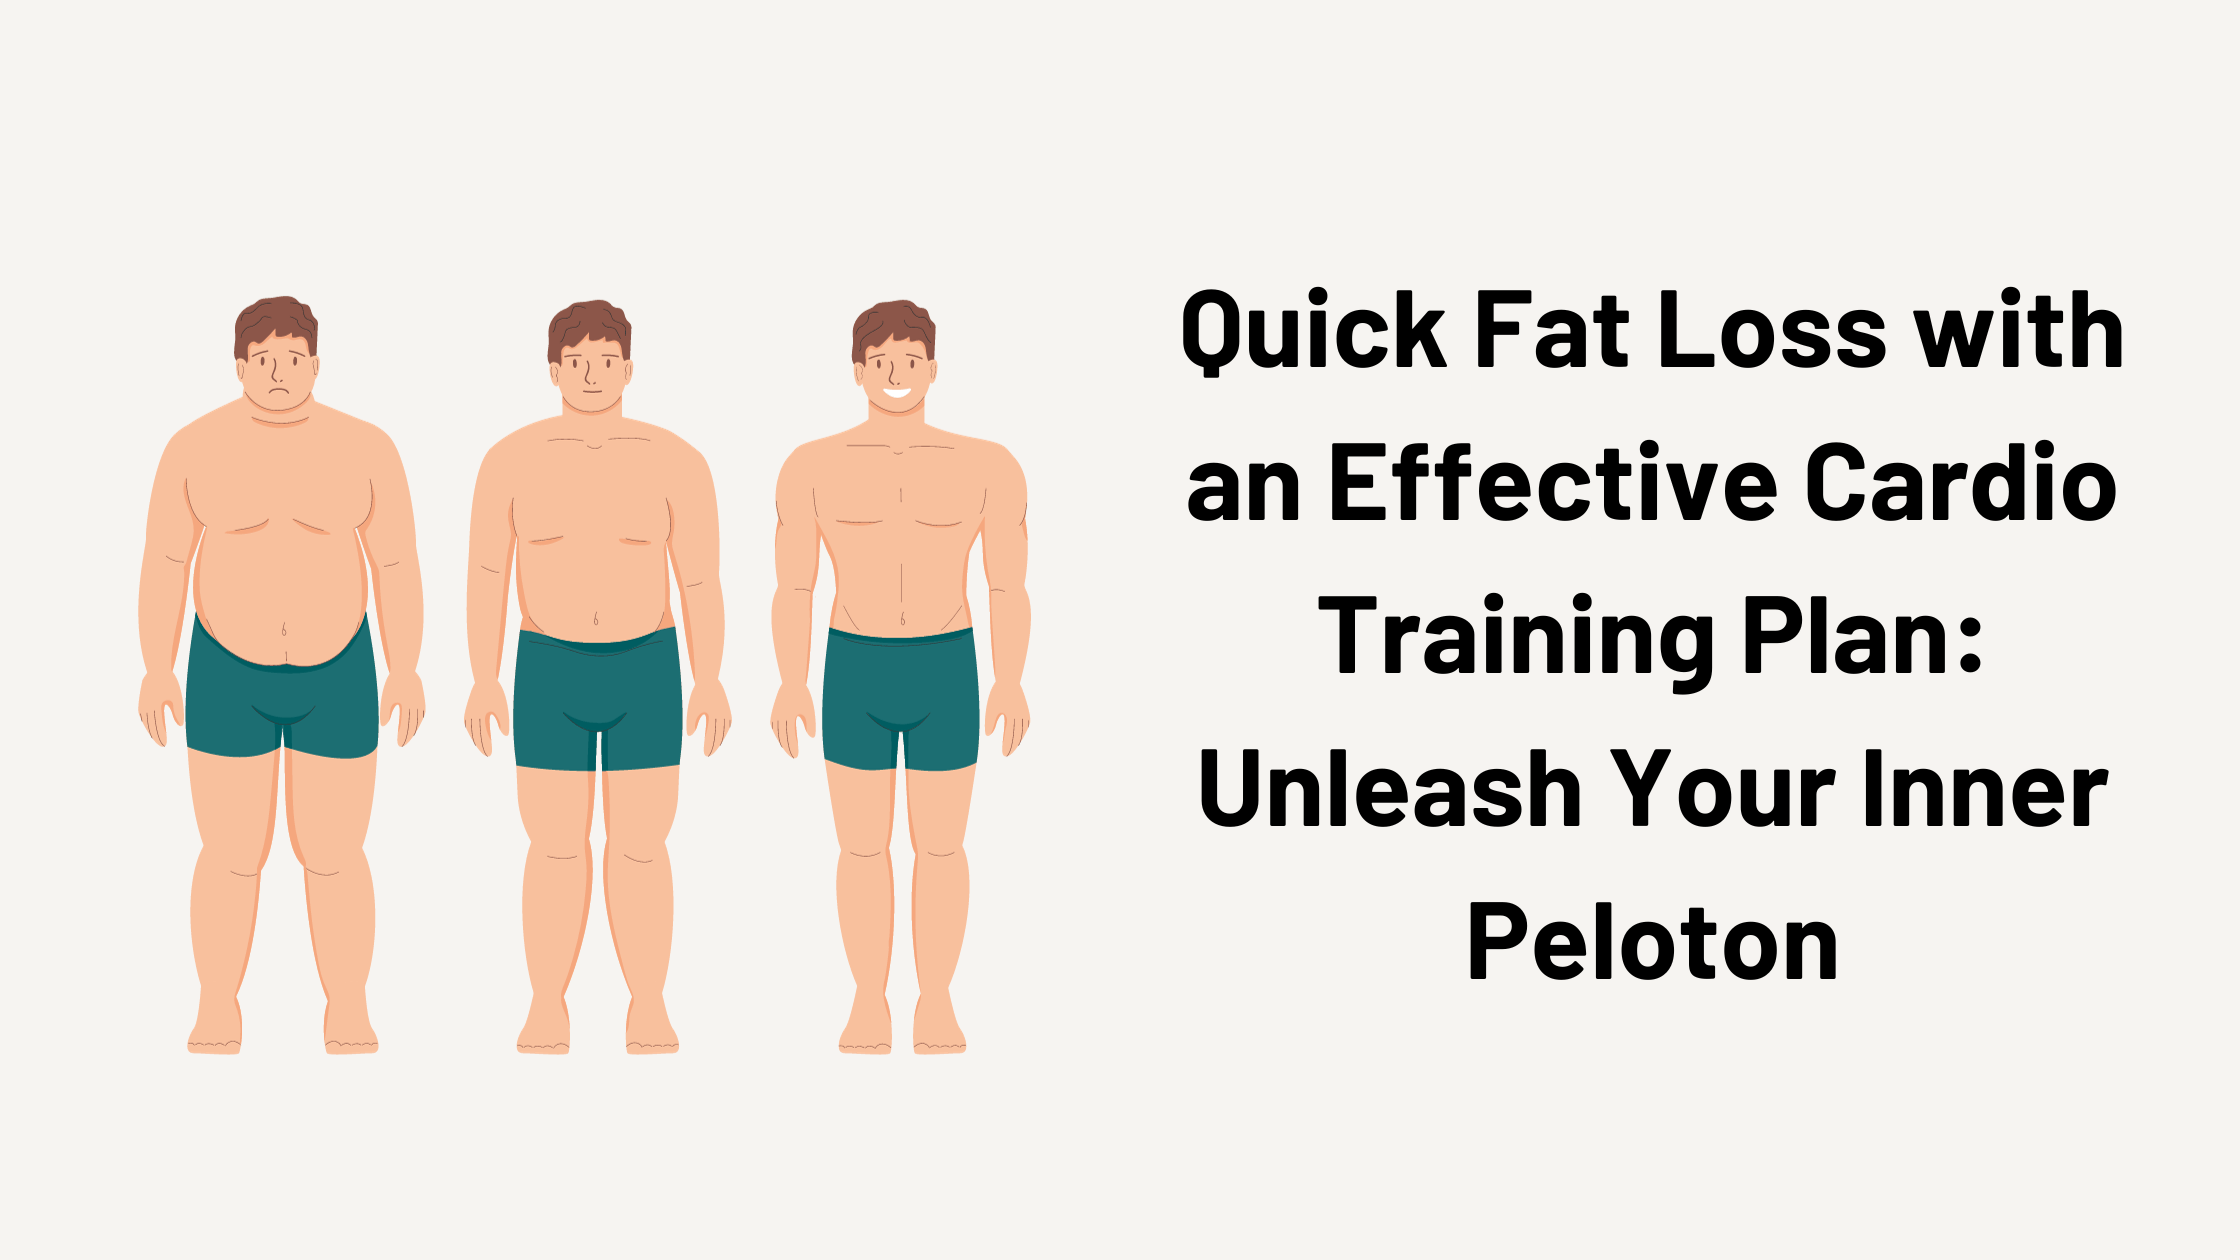 Quick Fat Loss Tips with an Effective Cardio Training Plan